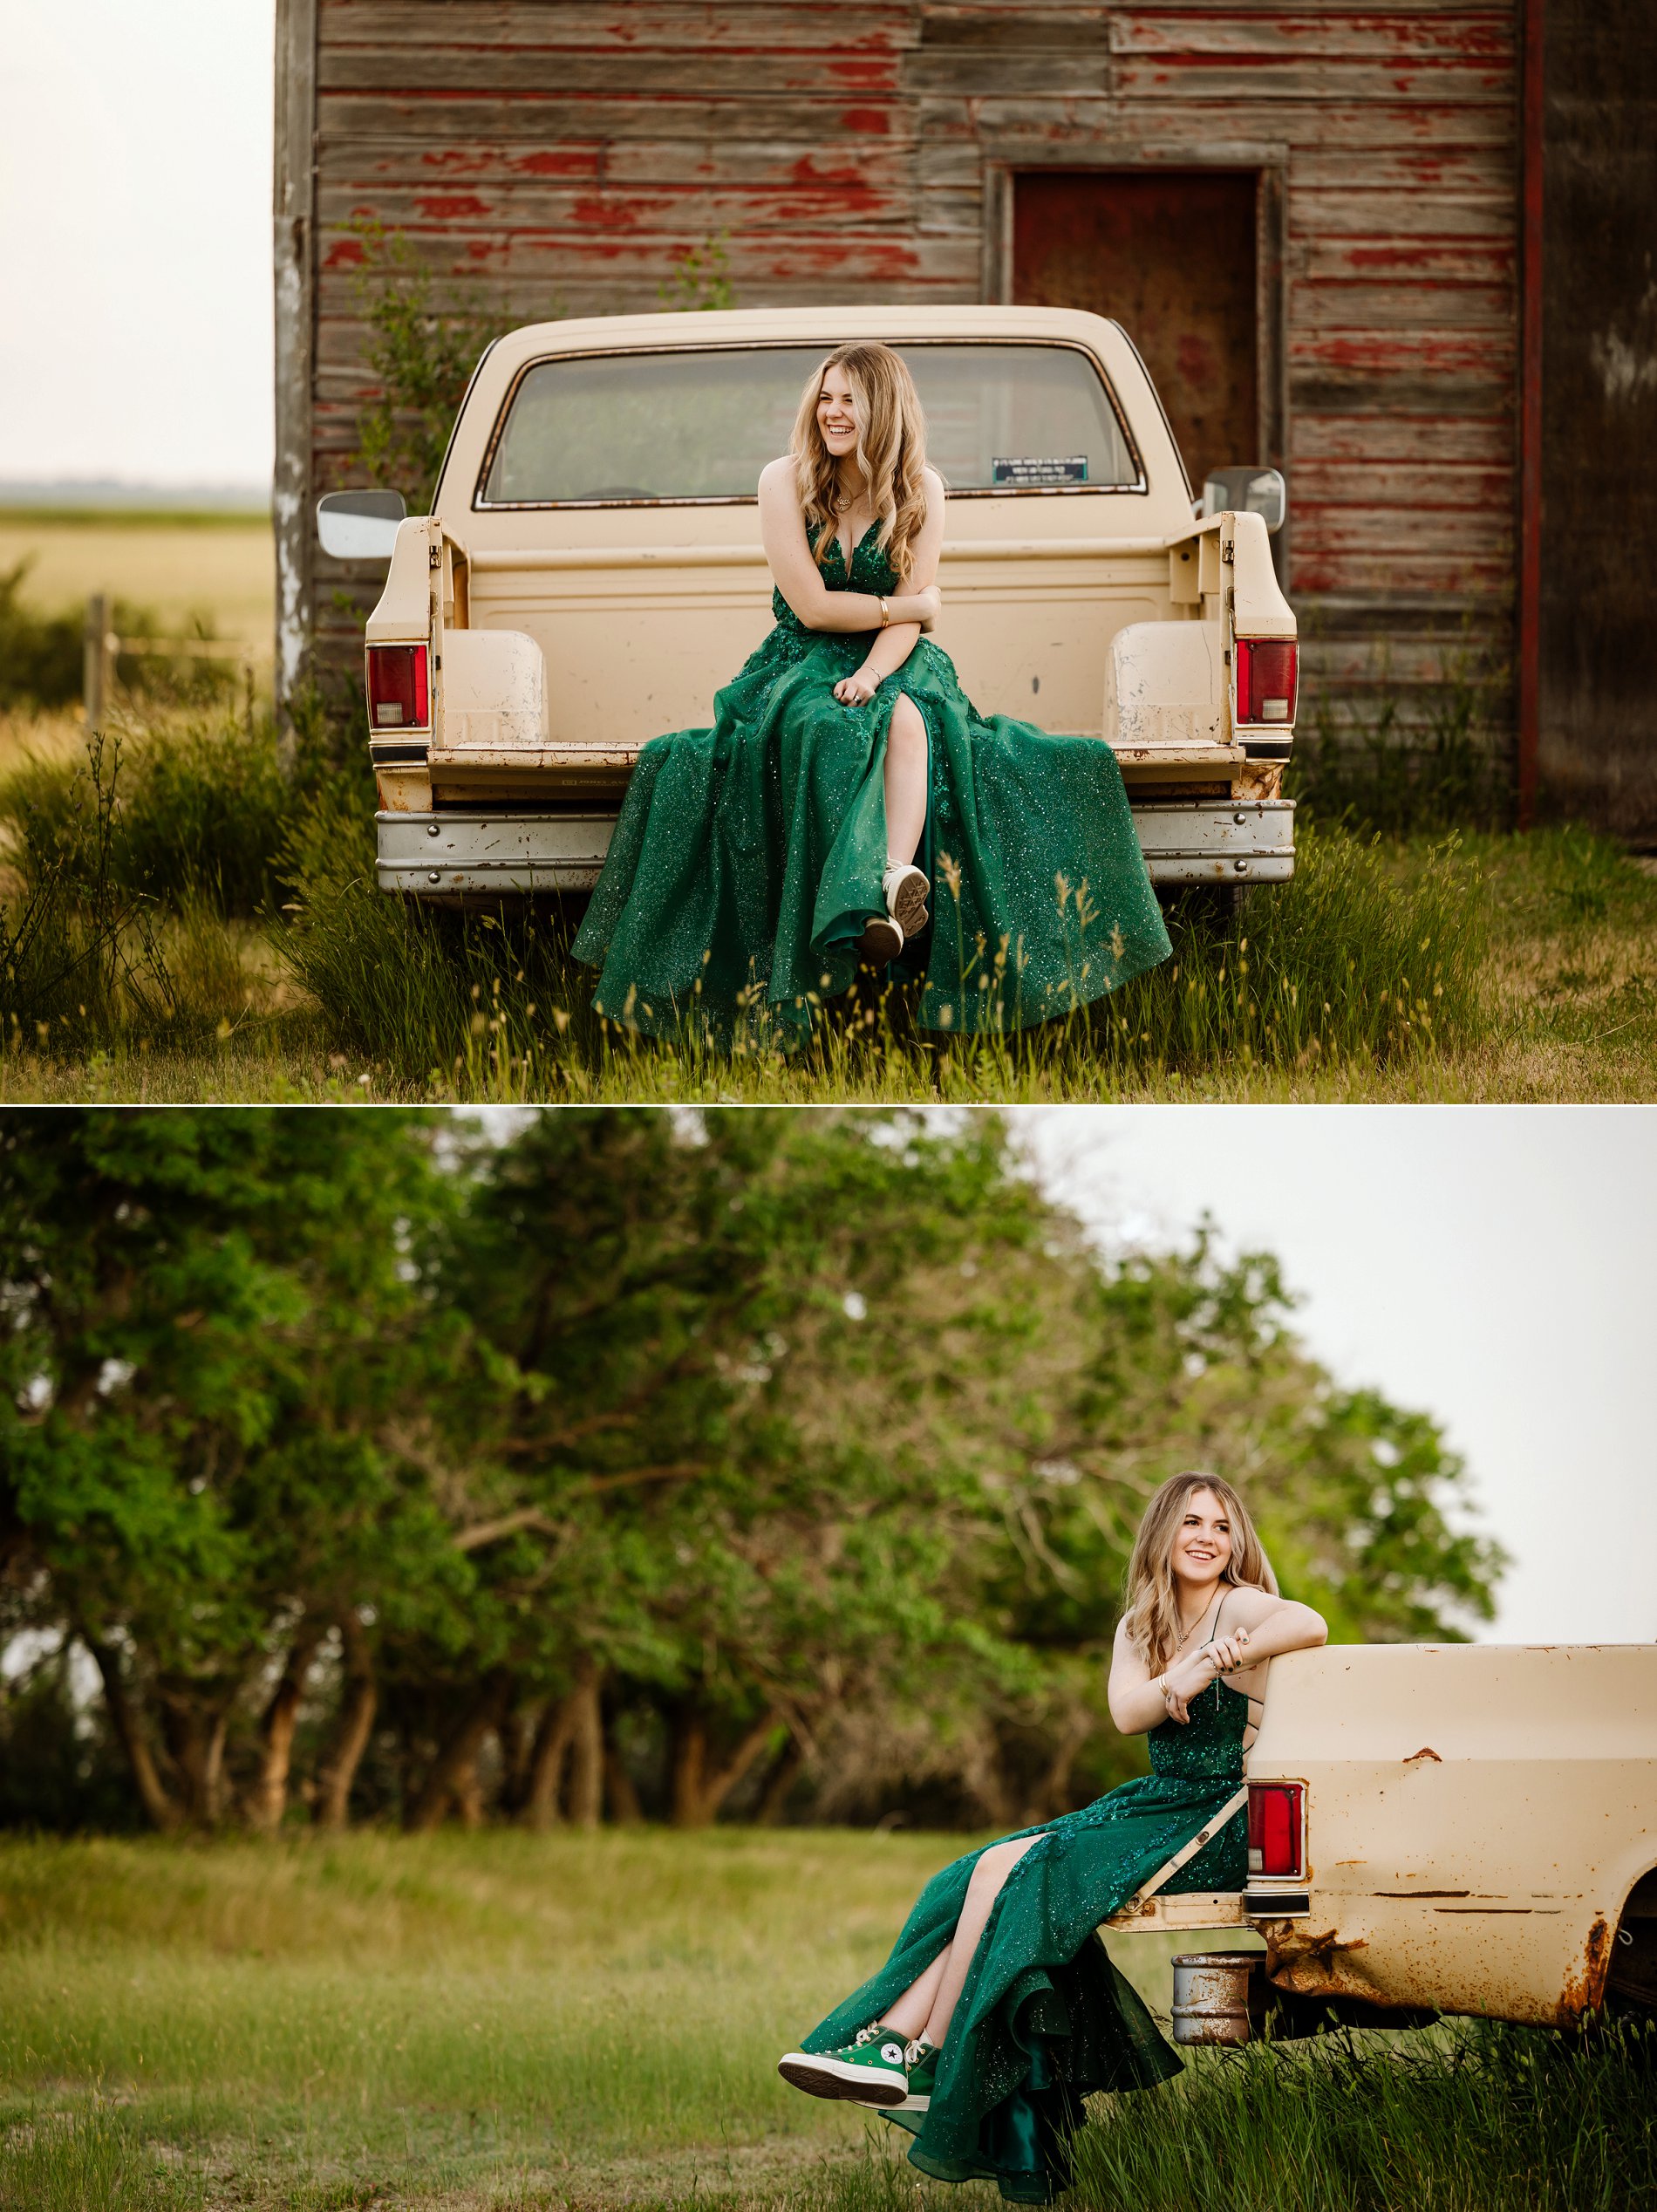 LCBI graduation photos on the family farm, with an old red barn and a vintage truck.